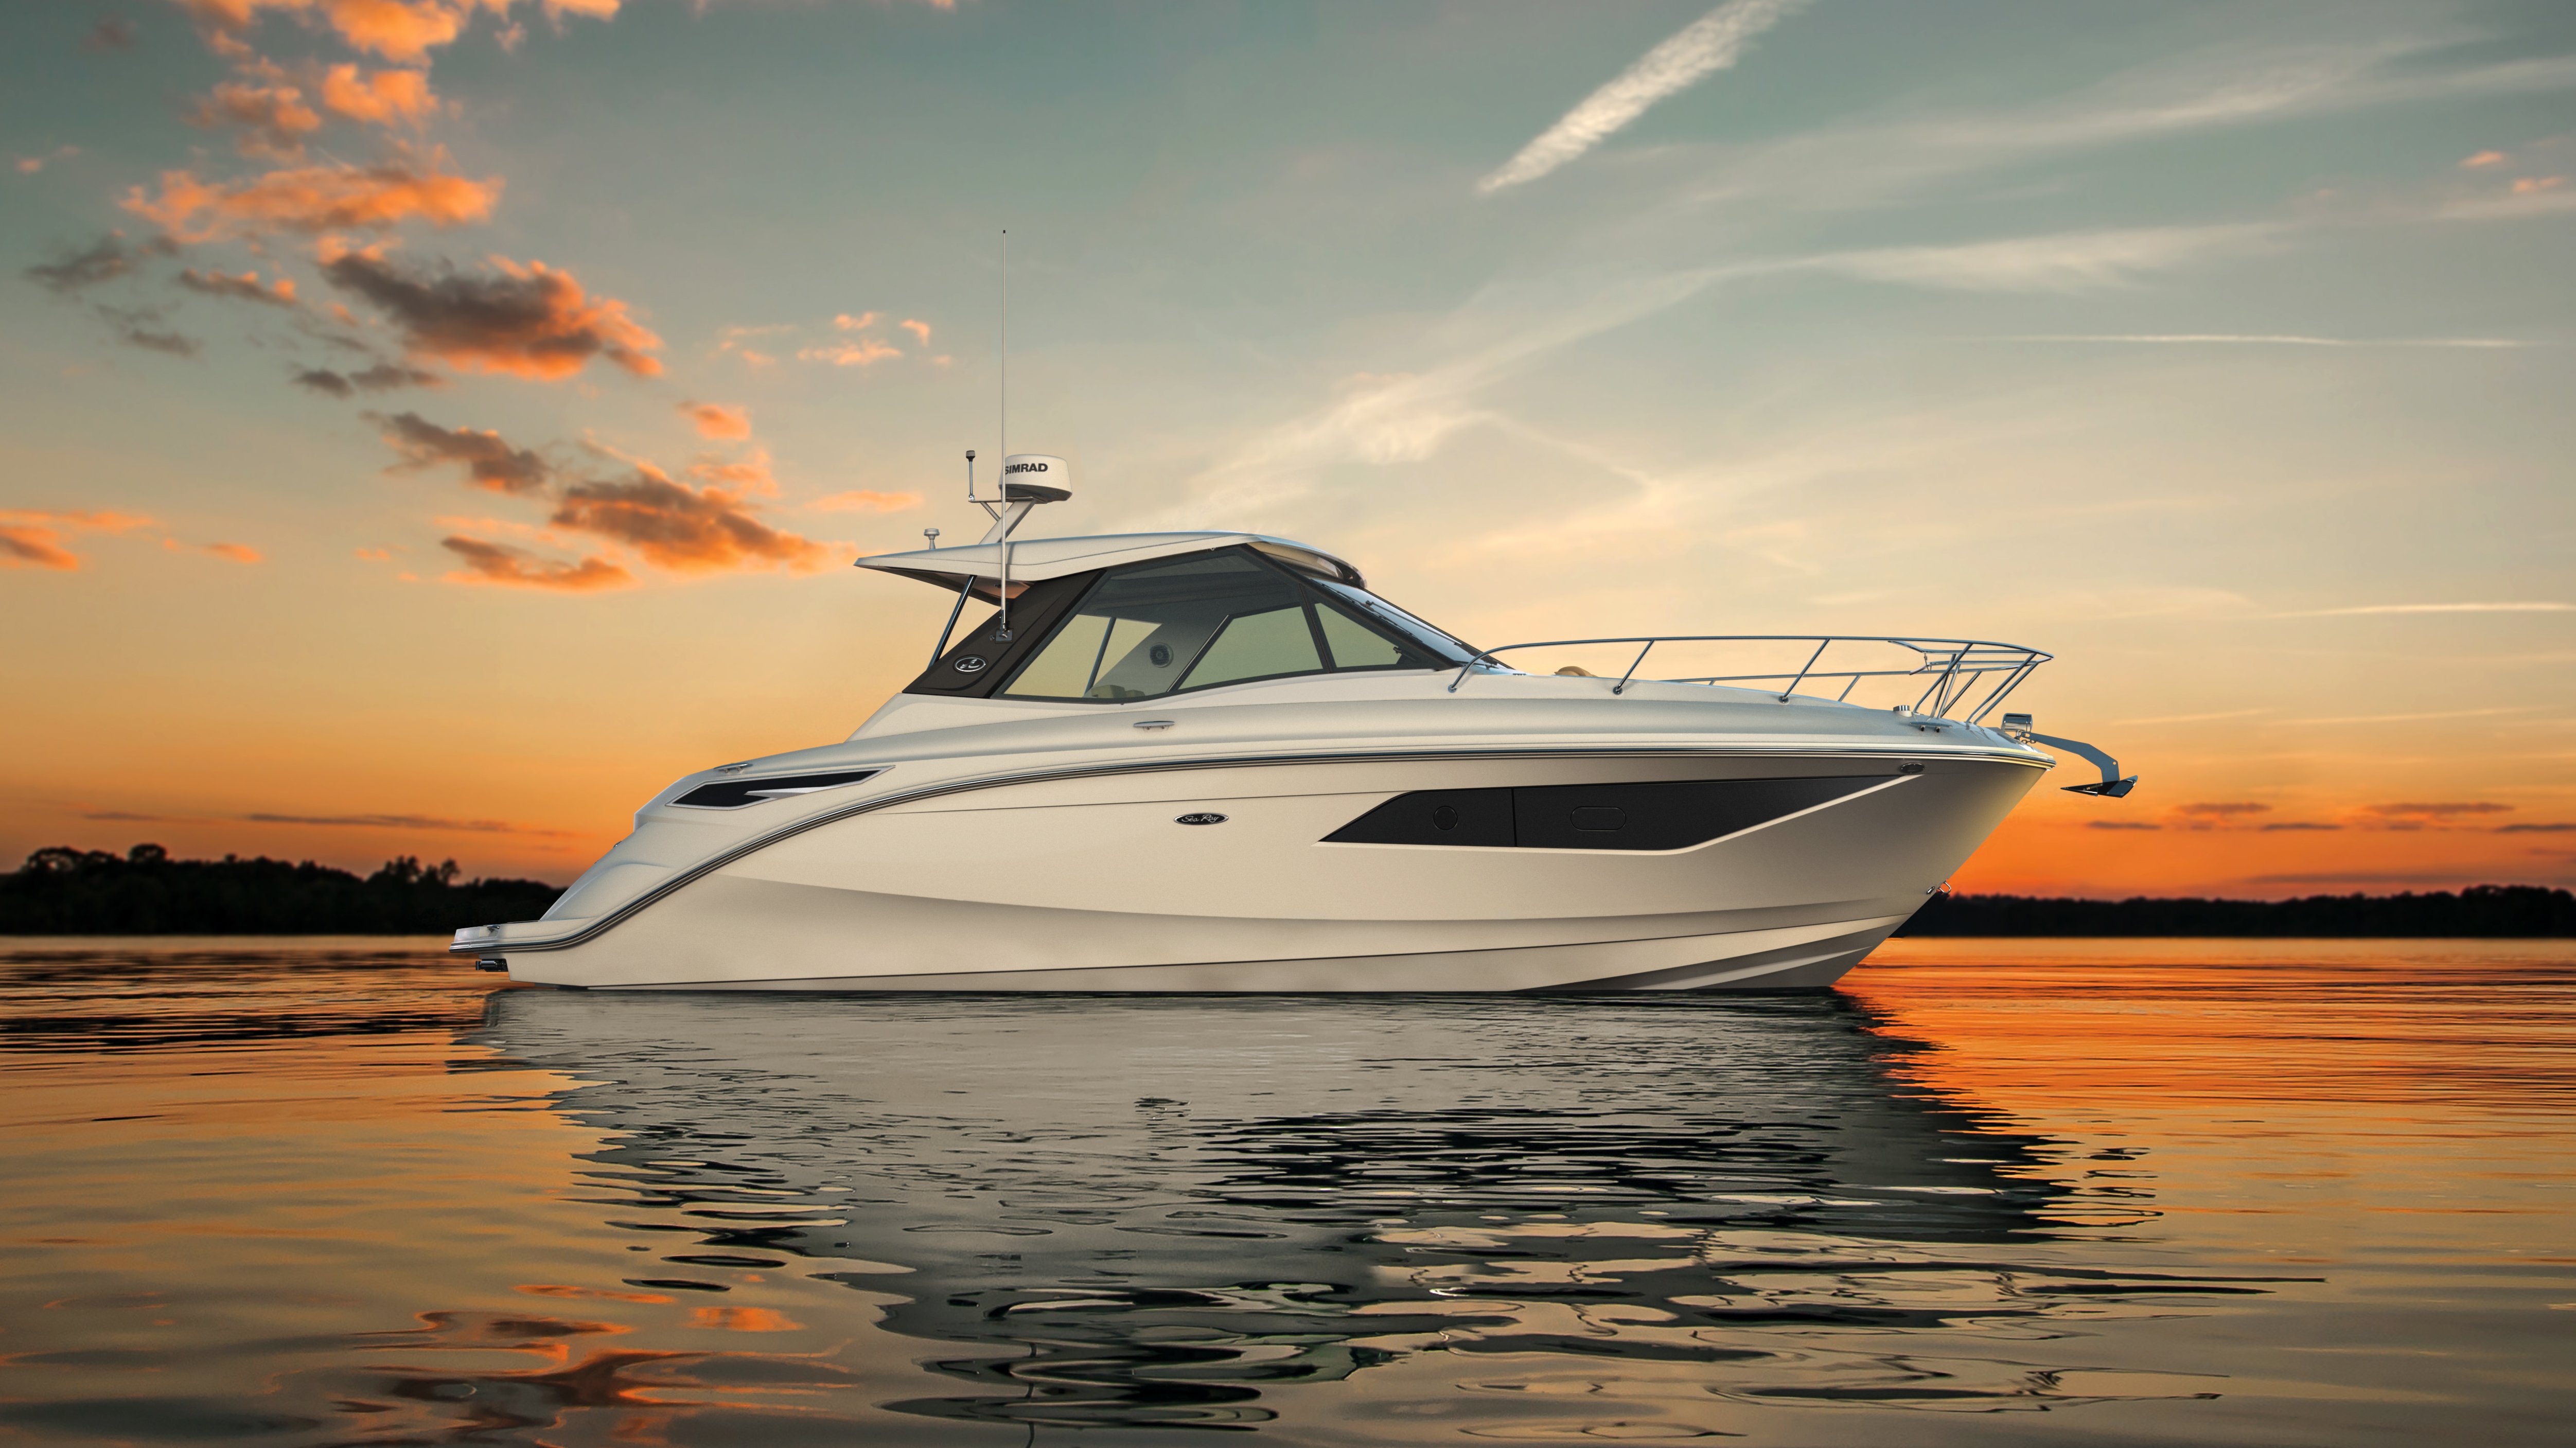 SEA-RAY ®'S-NEW-SUNDANCER-320-COUPE-MAKES-ITS-EUROPEAN-DEBUT-AT-THE-BOOT-DÜSSELDORF-INTERNATIONAL-BOAT-SHOW